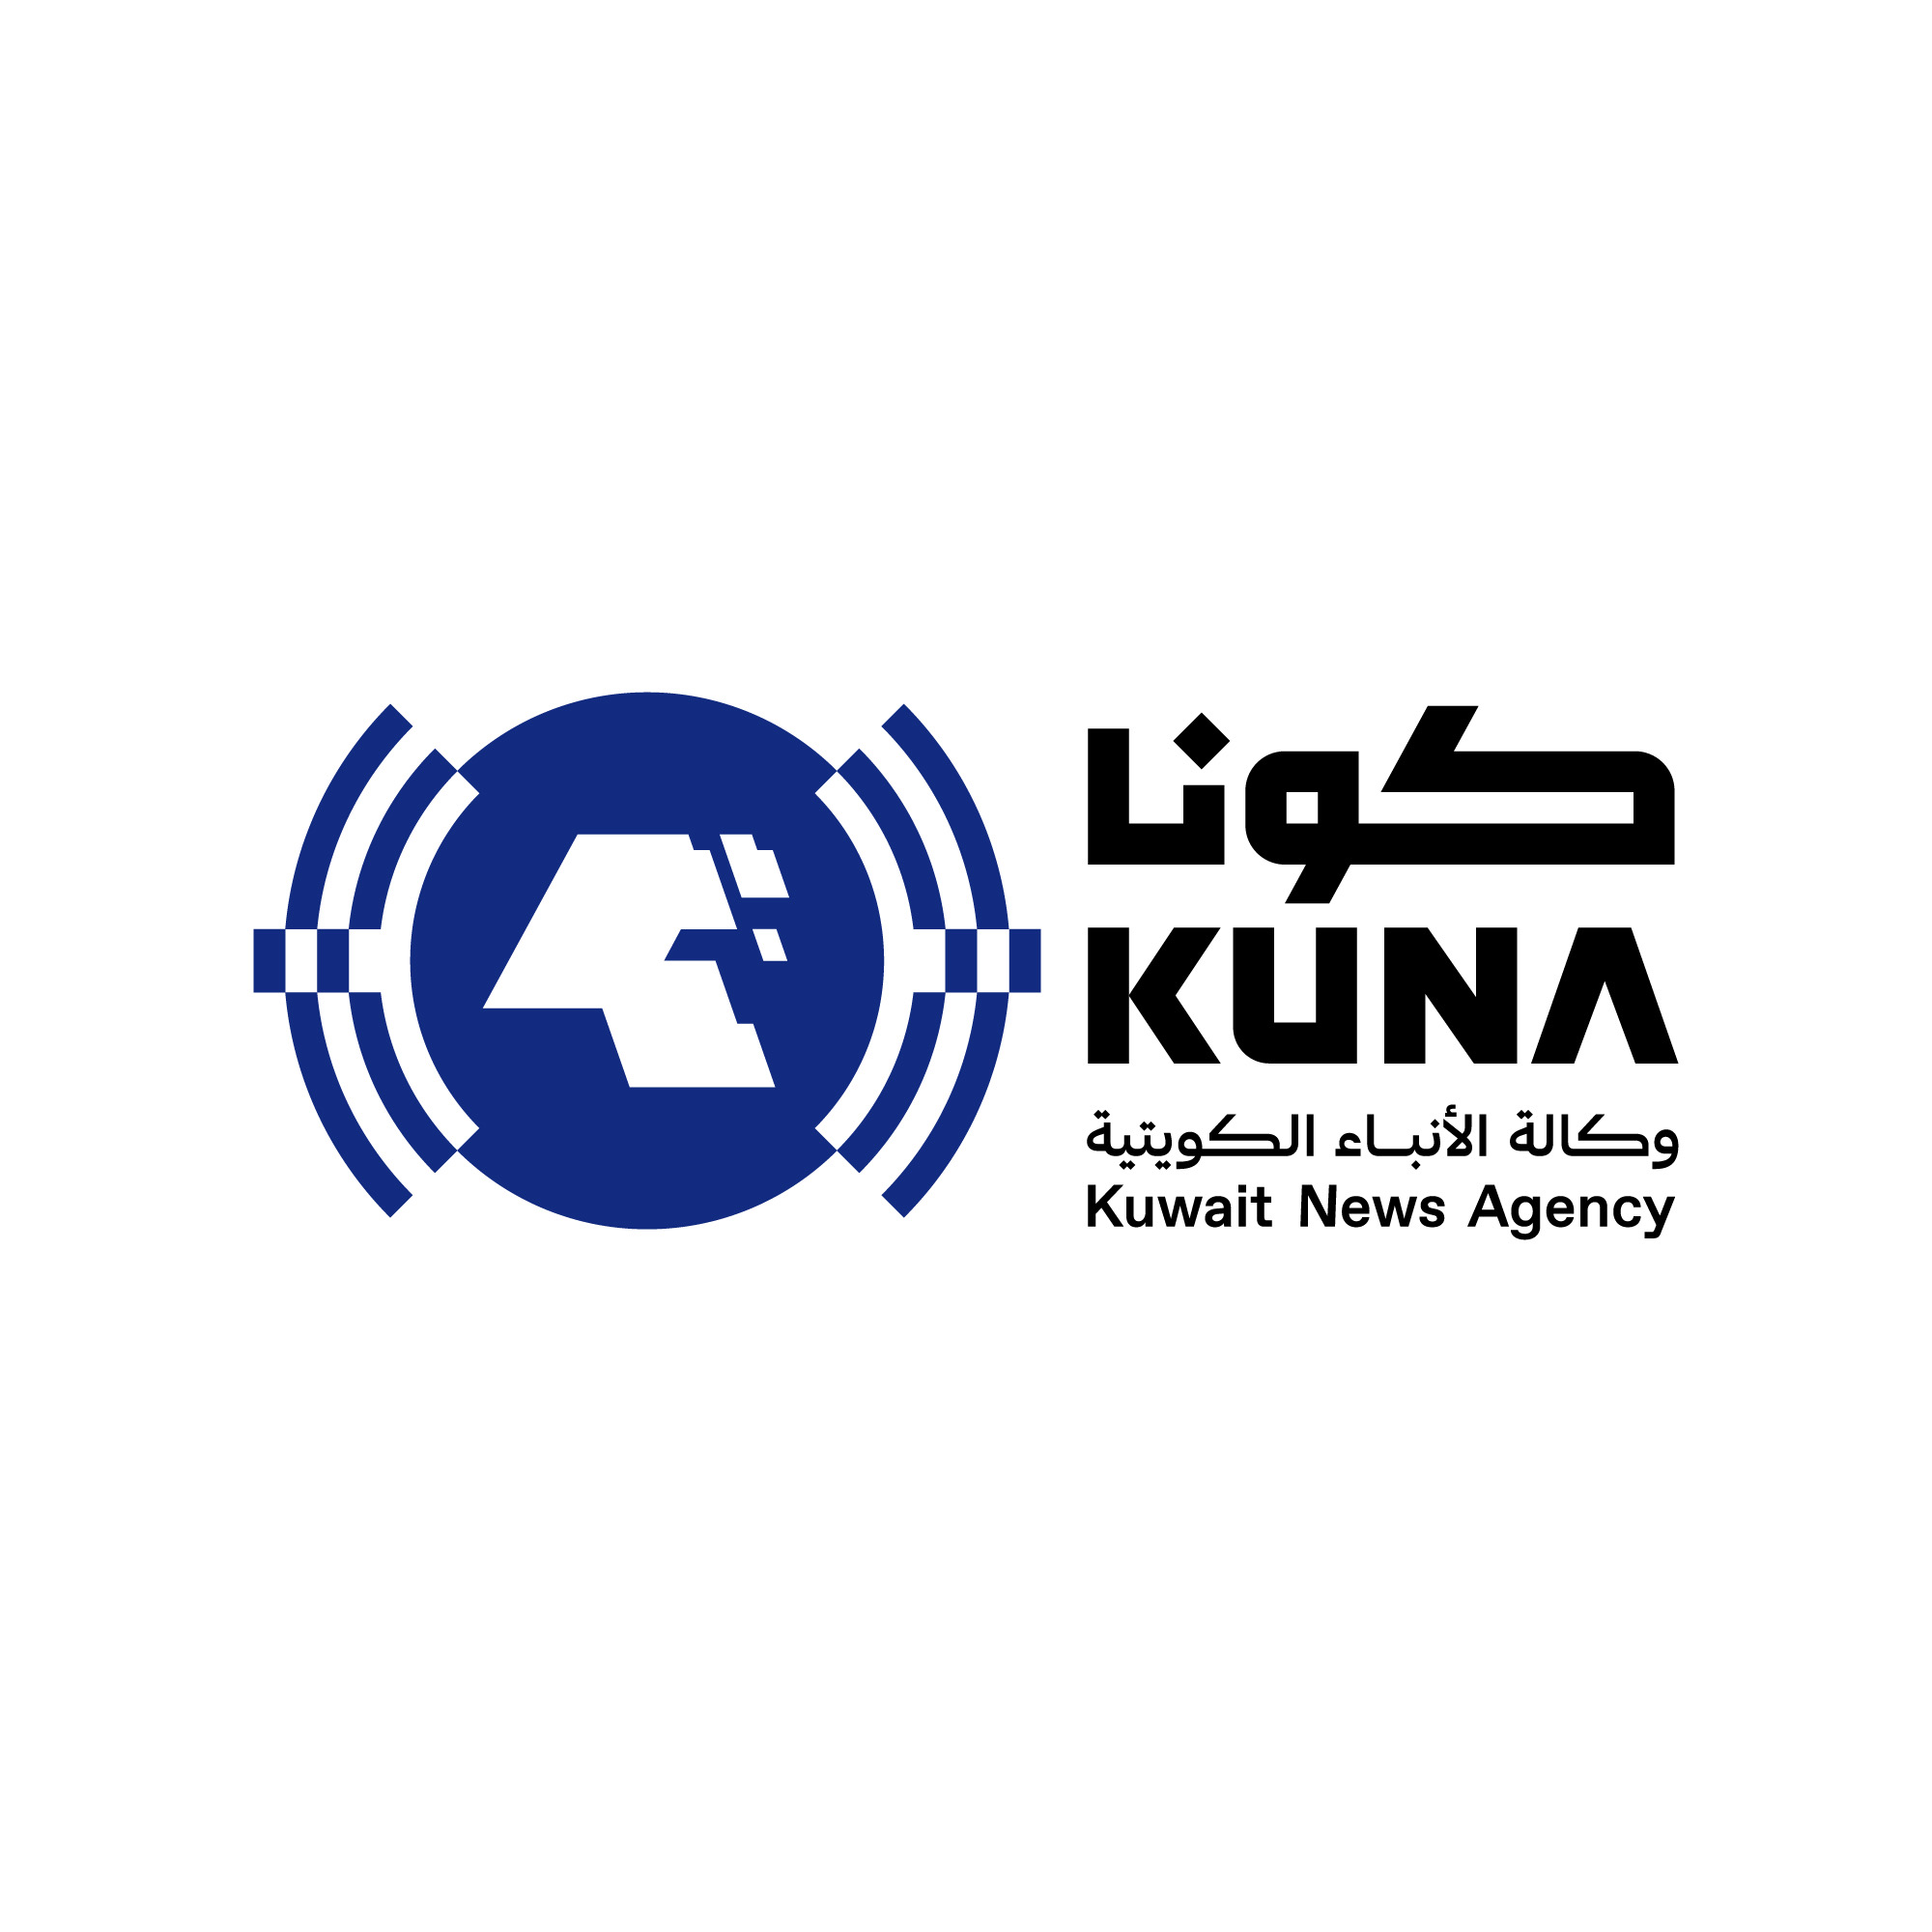 Briefing of KUNA main news for Sunday until 00:00 GMT                                                                                                                                                                                                     